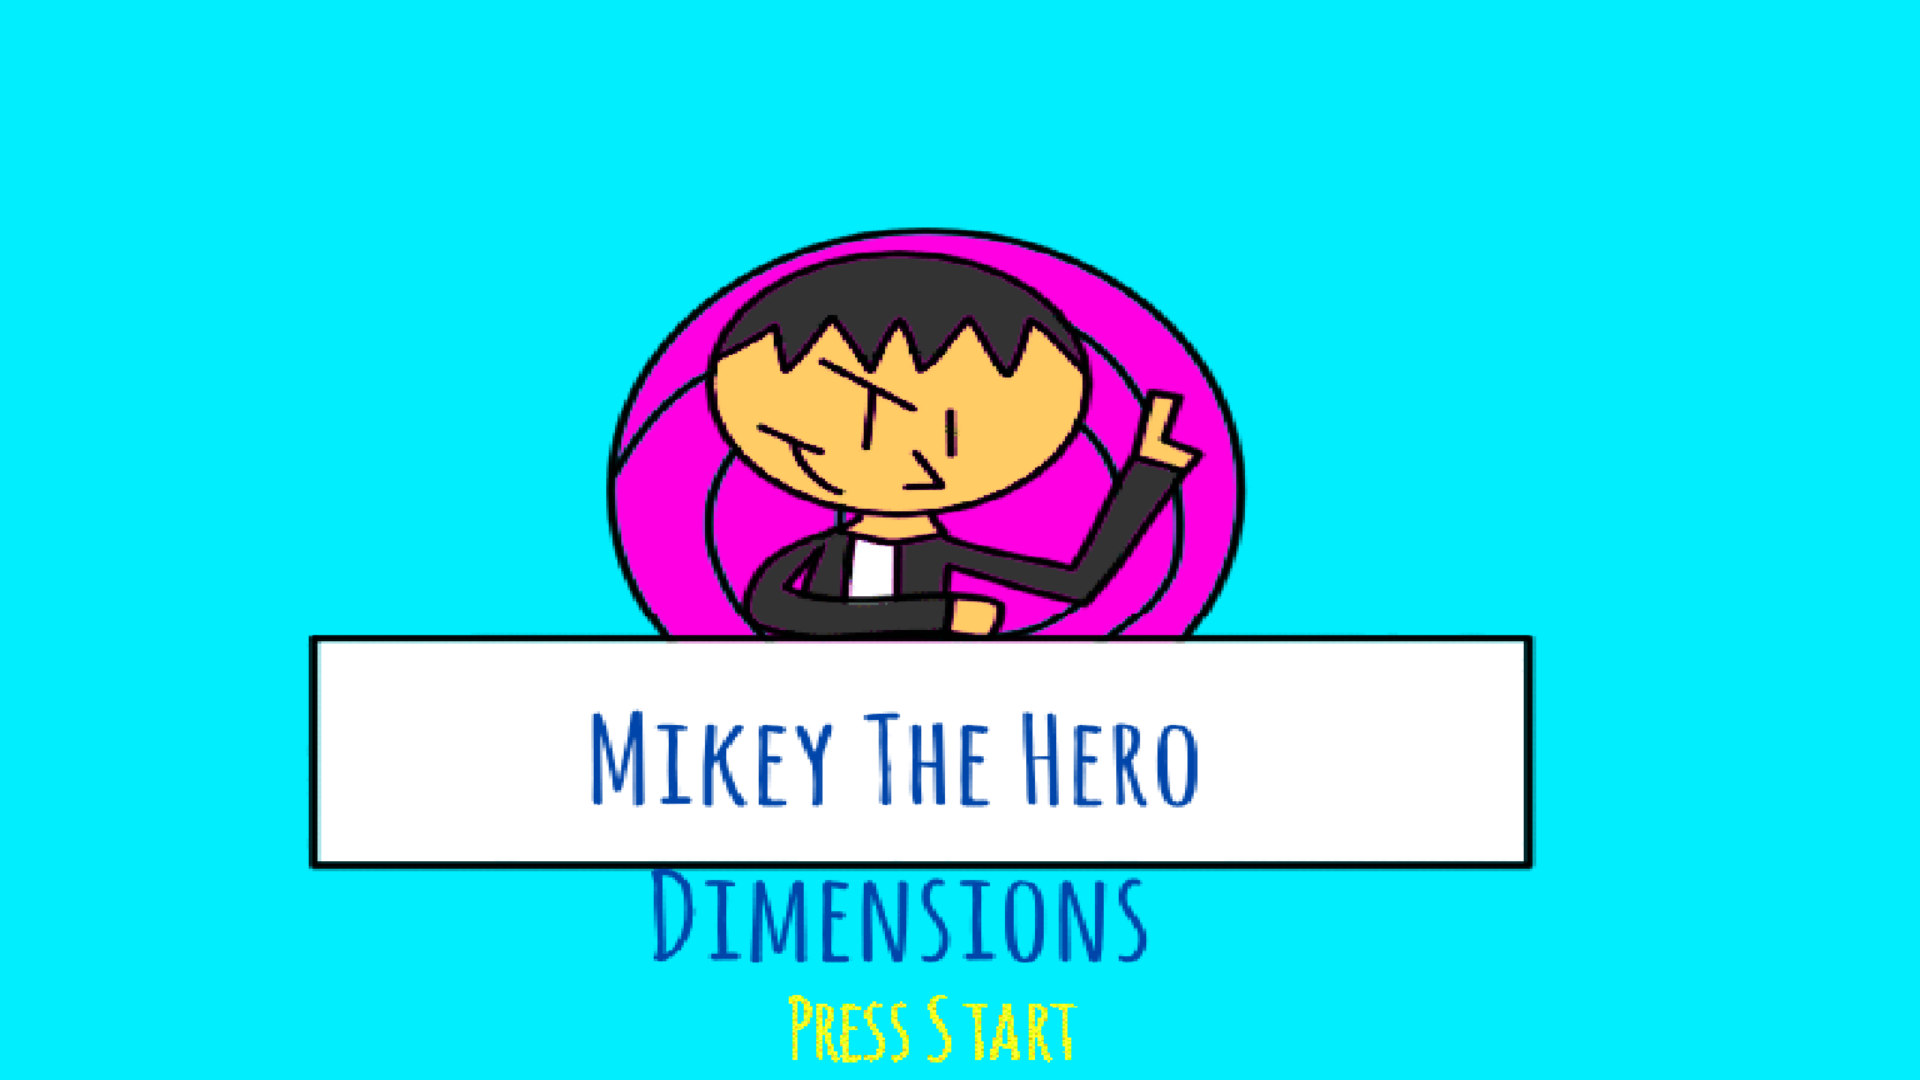 Mikey The Hero: Dimensions